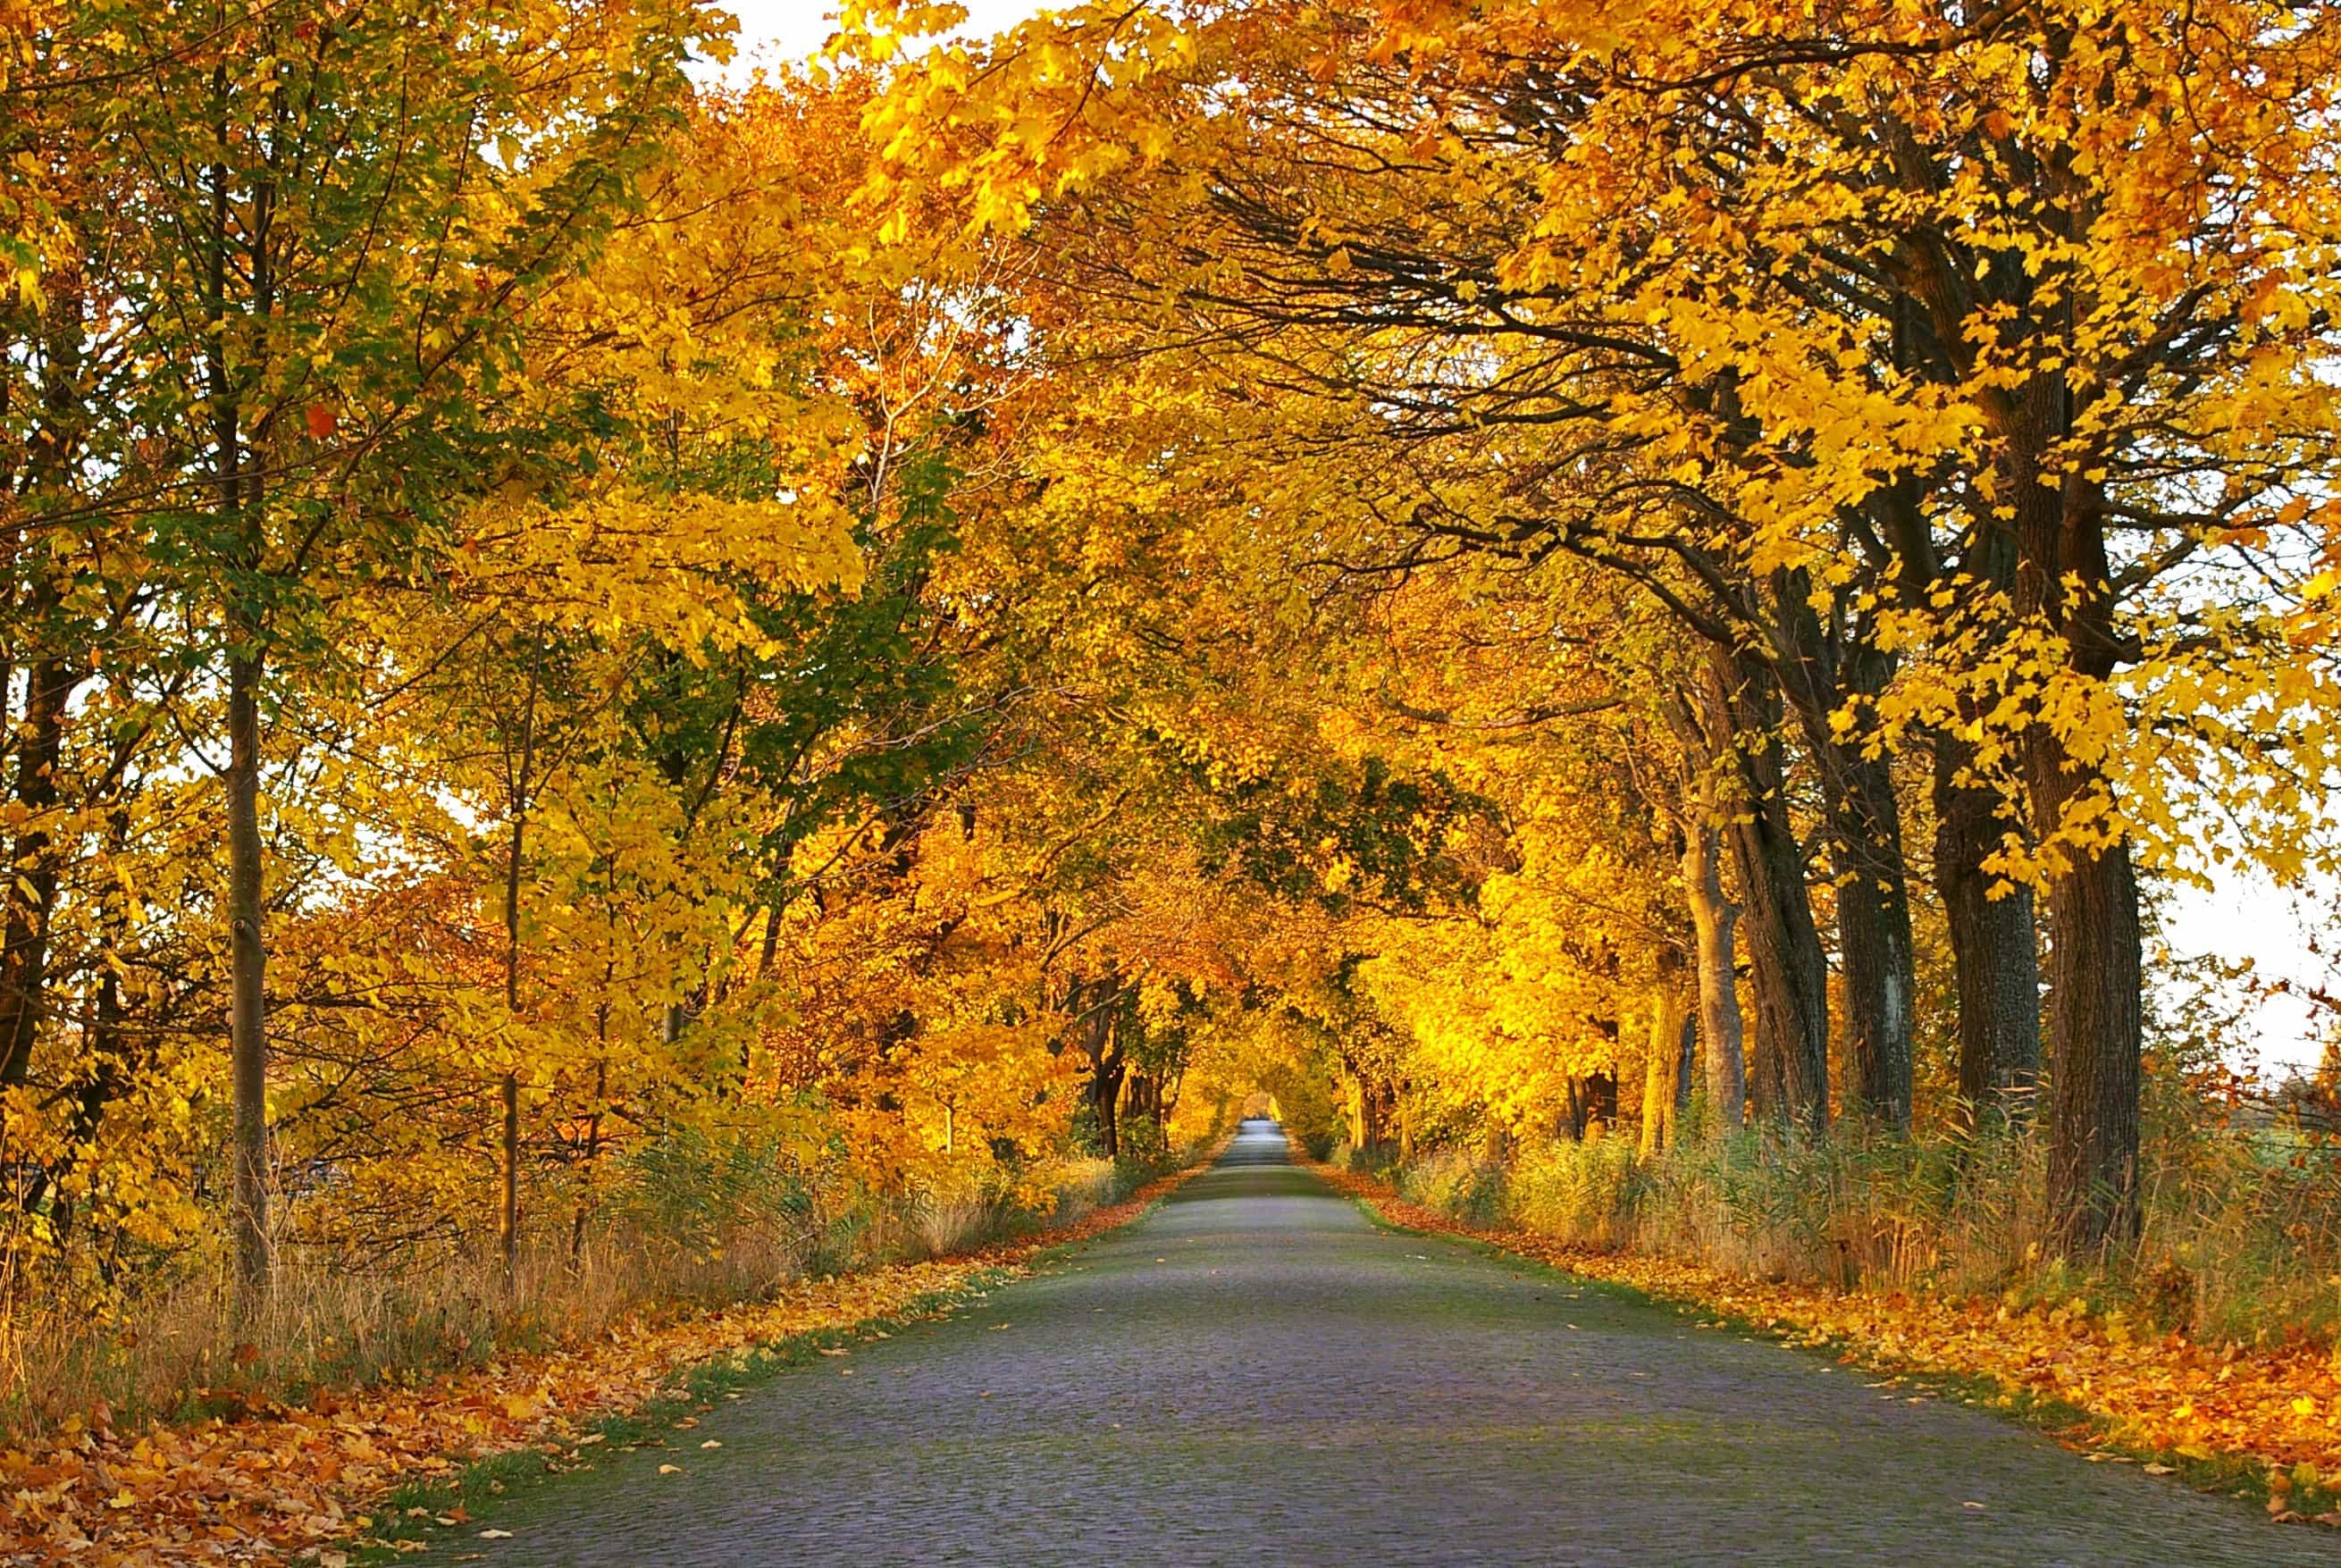 Free picture: road, wood, landscape, nature, tree, leaf, autumn, forest road